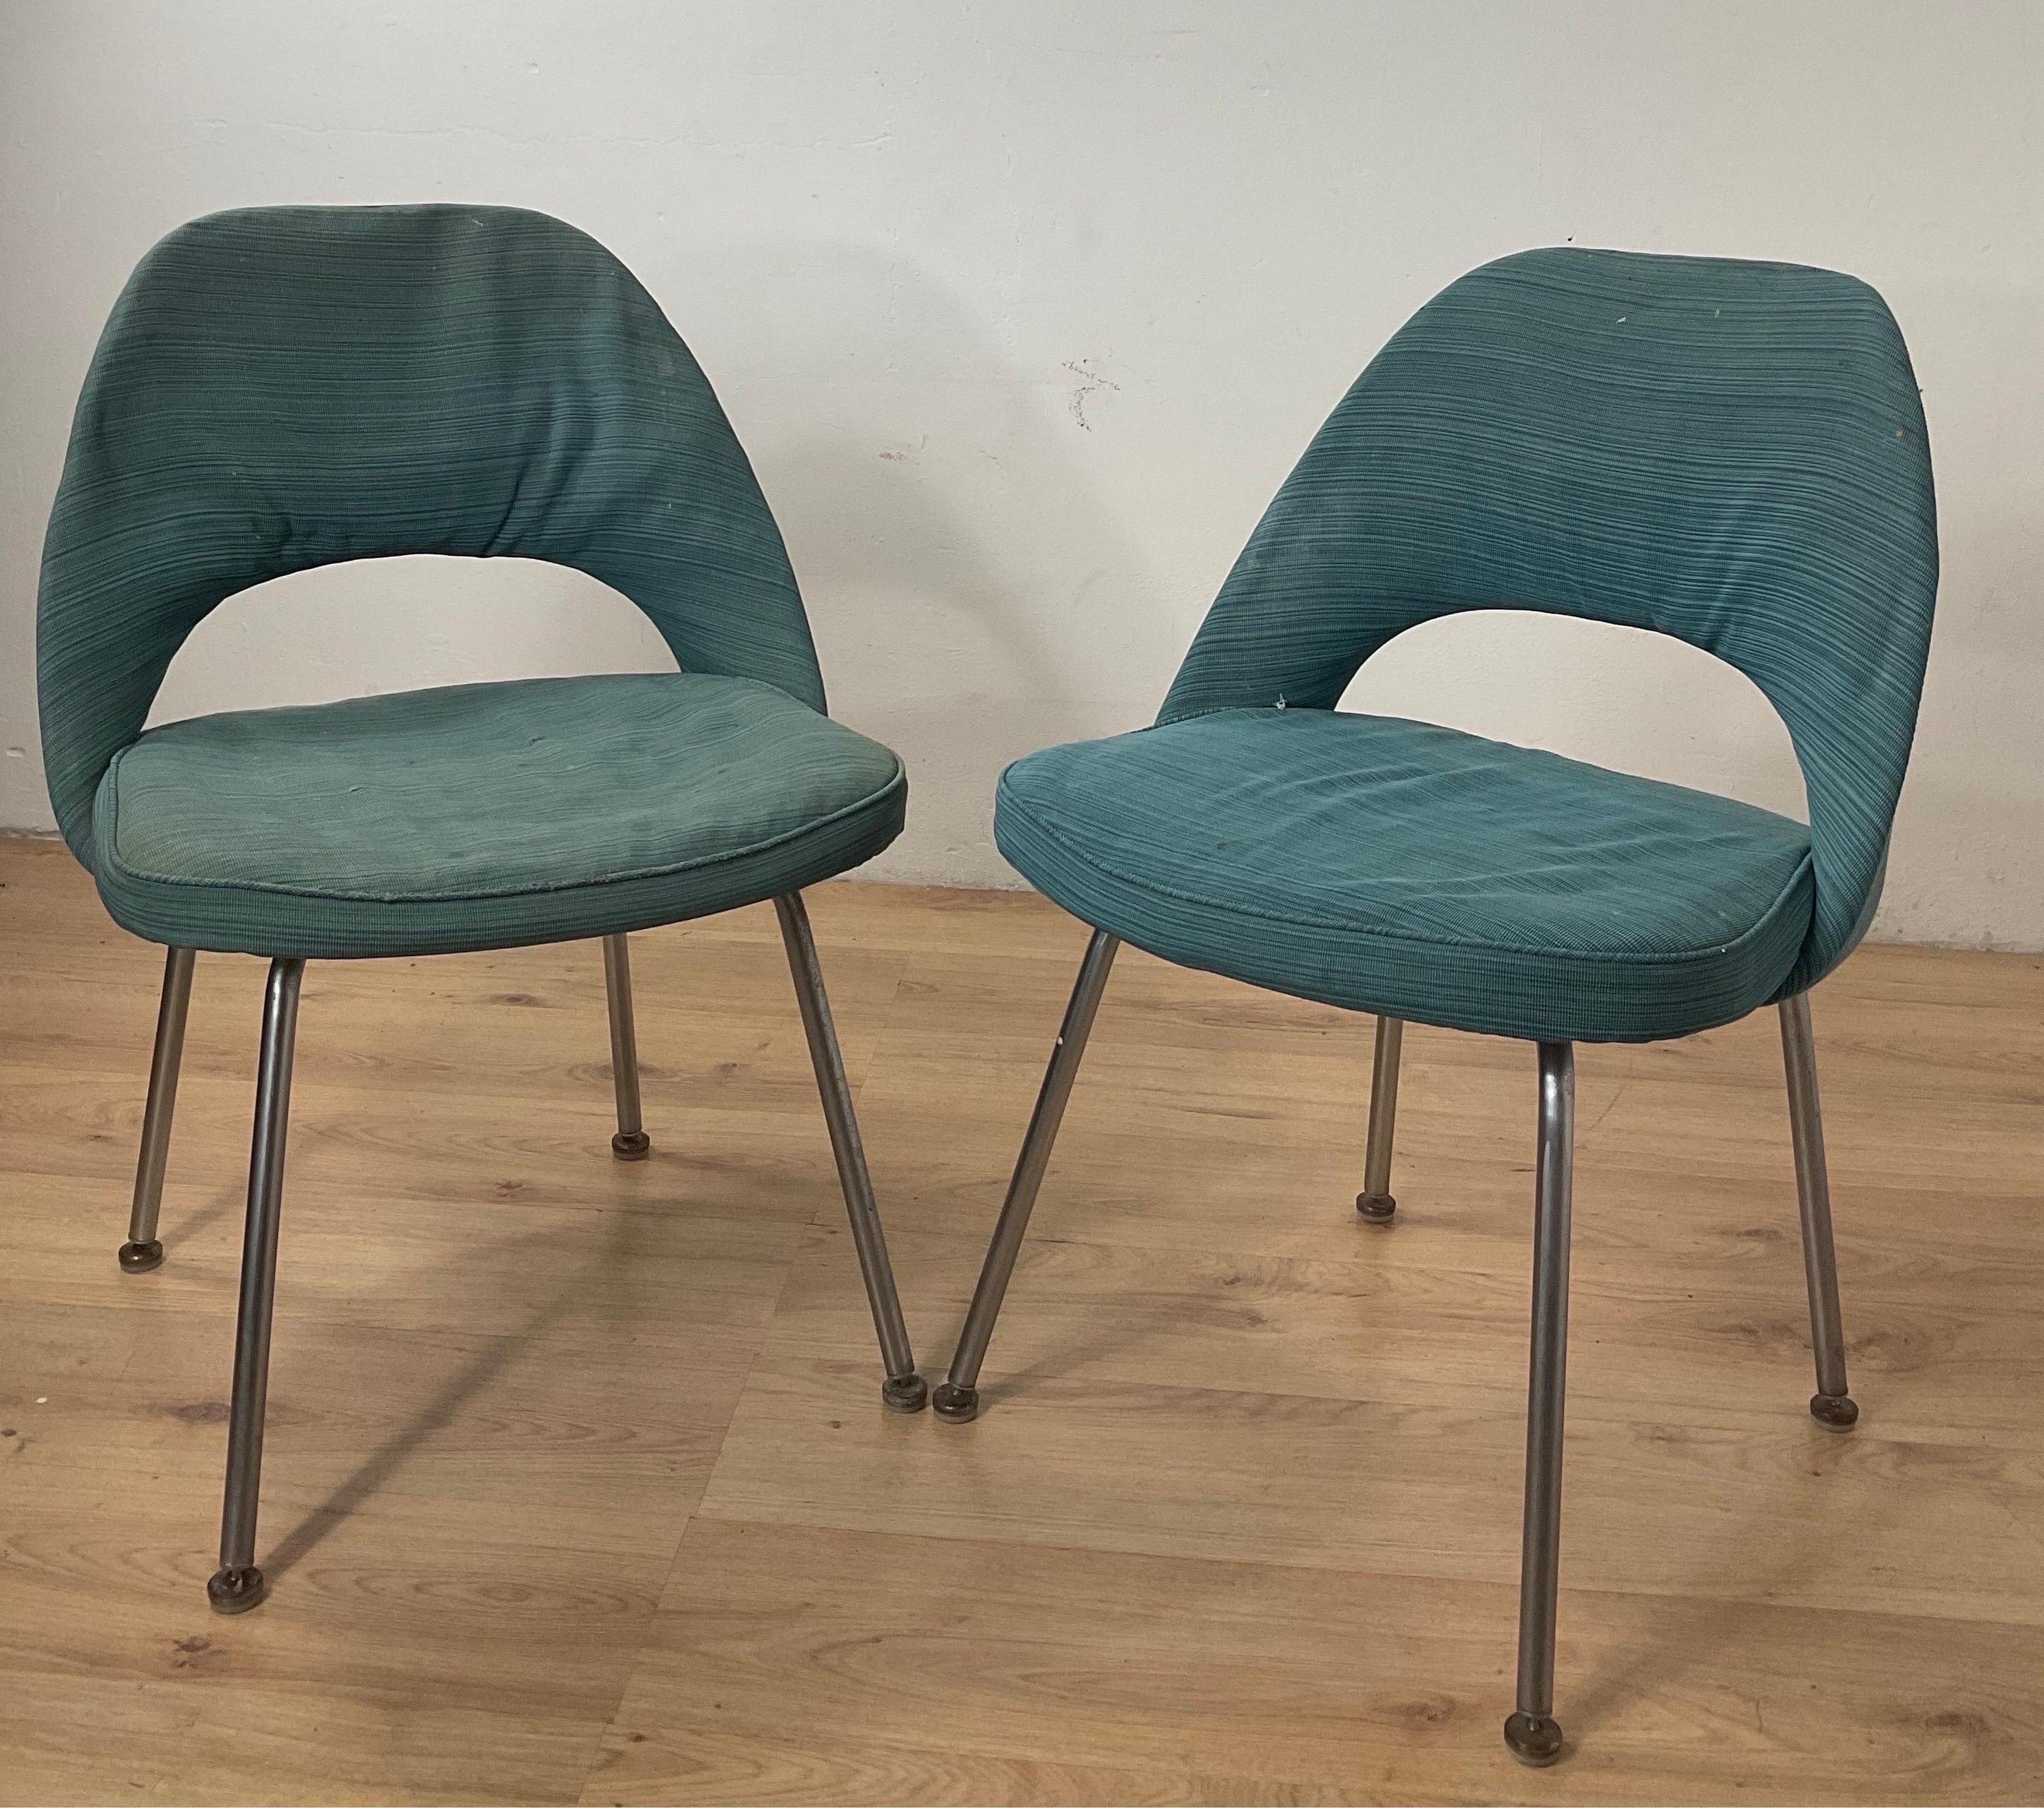 The Saarinen Conference is a chair conceived from the idea of transforming the executive seat into something more comfortable and elegant. A chair that was a piece of furniture of great charm even if placed in a meeting room. To make it versatile